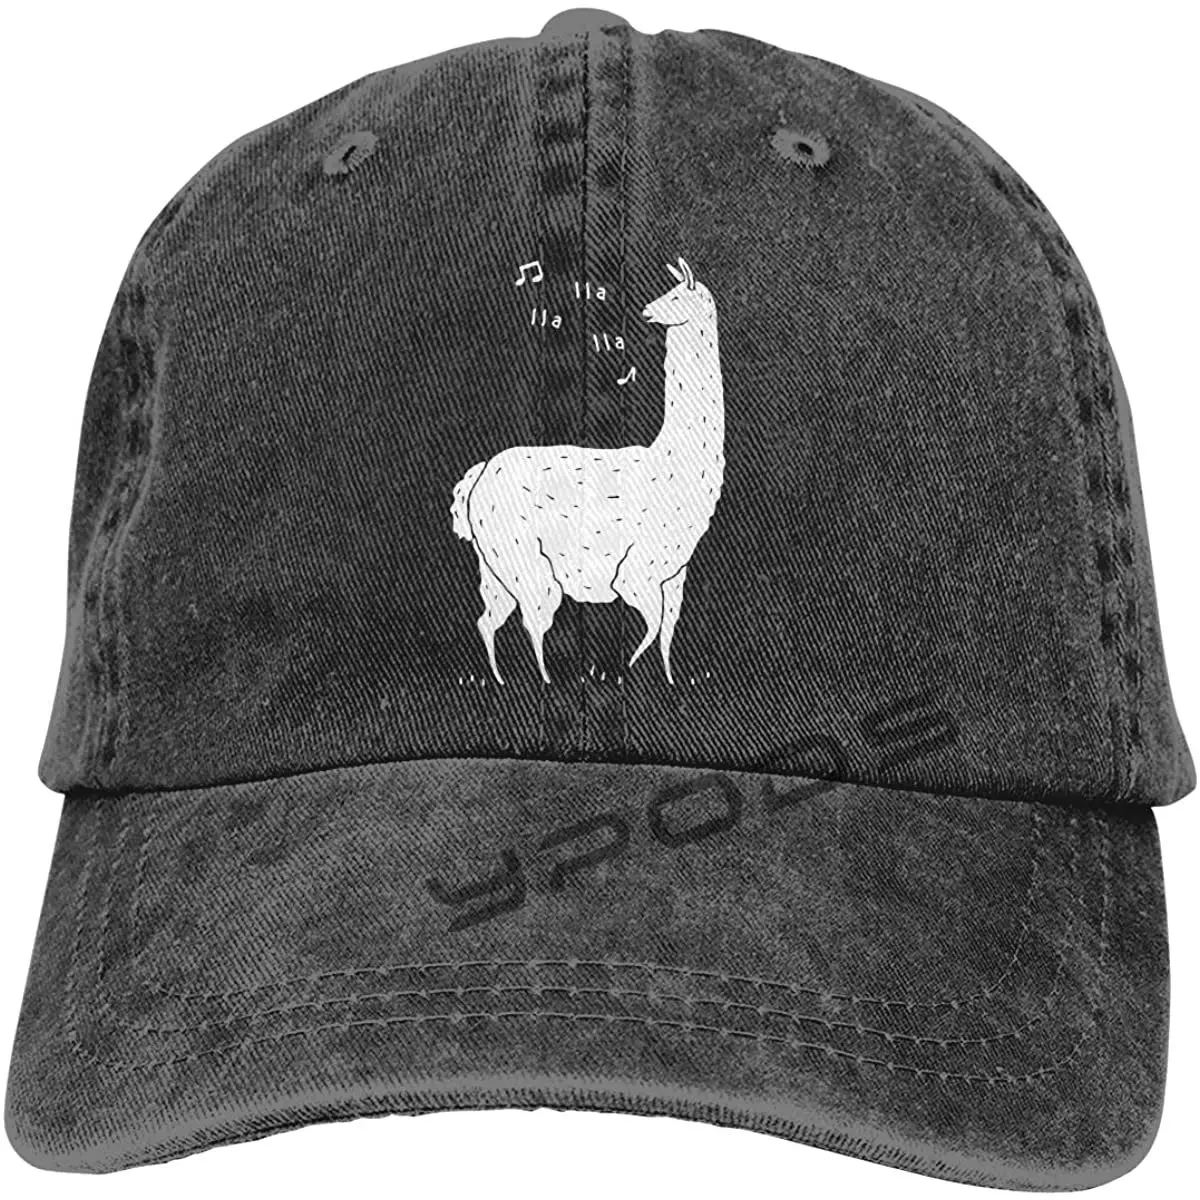 

Song Of The Llama Vintage Washed Twill Baseball Caps Adjustable Hat Funny Humor Irony Graphics Of Adult Gift Black Gorras Hombre